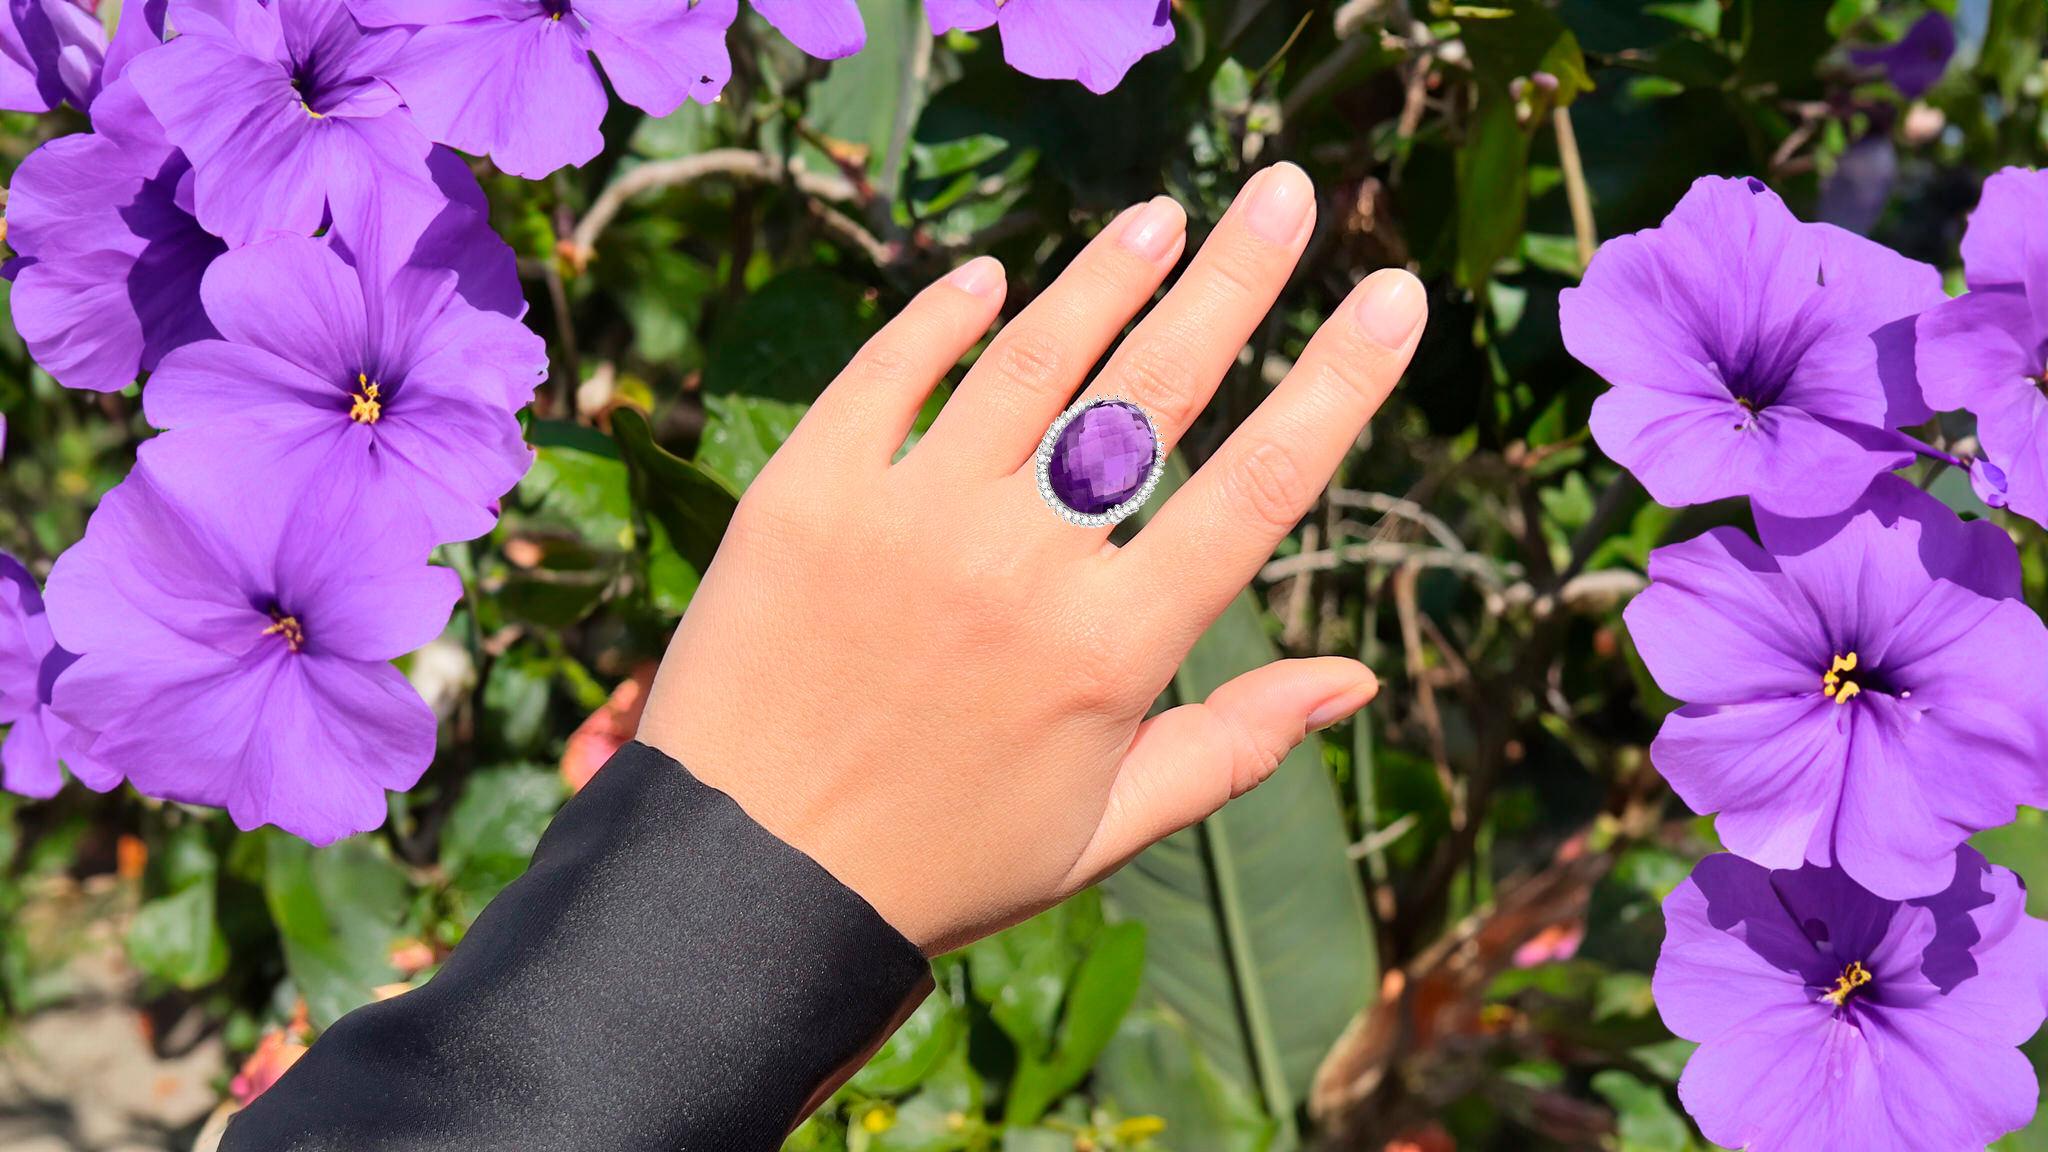 It comes with the Gemological Appraisal by GIA GG/AJP
All Gemstones are Natural
Amethyst = 14.45 Carats
42 Diamonds = 0.50 Carats
Metal: Rhodium Plated Sterling Silver
Ring Size: 7* US
*It can be resized complimentary